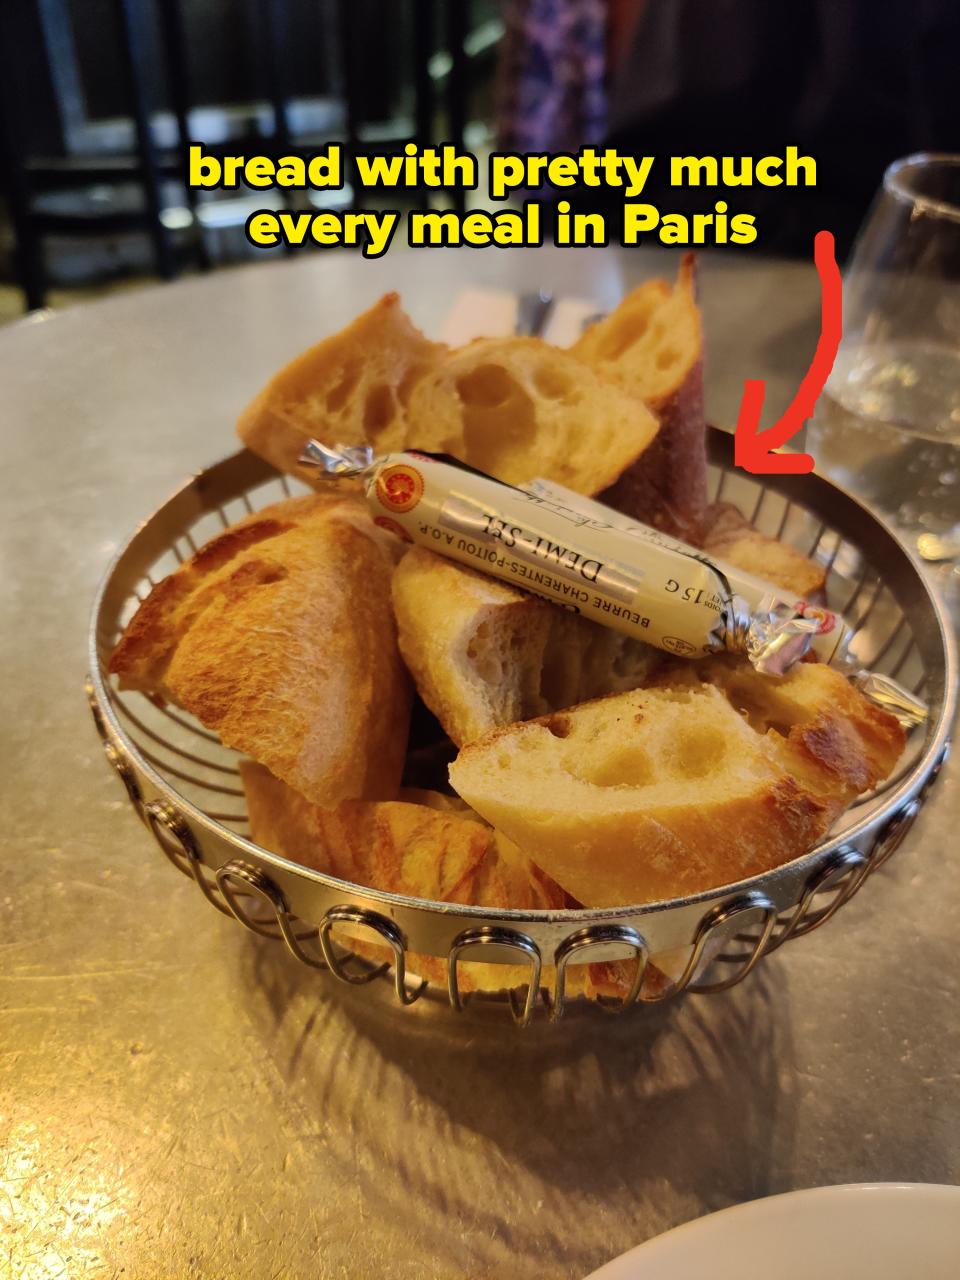 Basket of sliced bread on a table, suggesting a dining experience